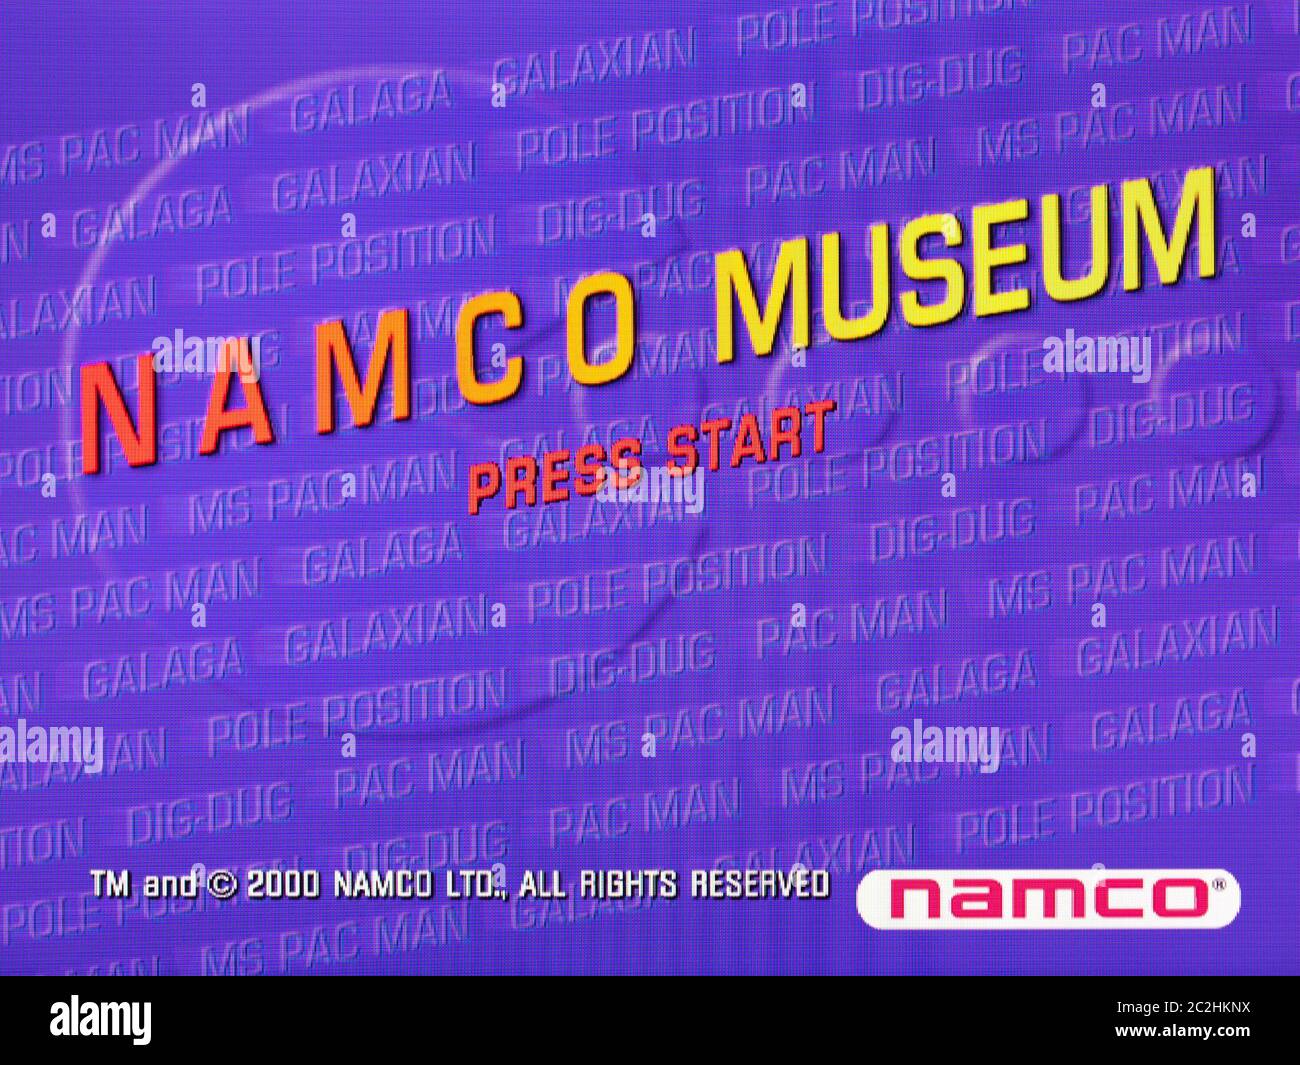 Namco Museum - Sega Dreamcast Videogame - Editorial use only Stock Photo